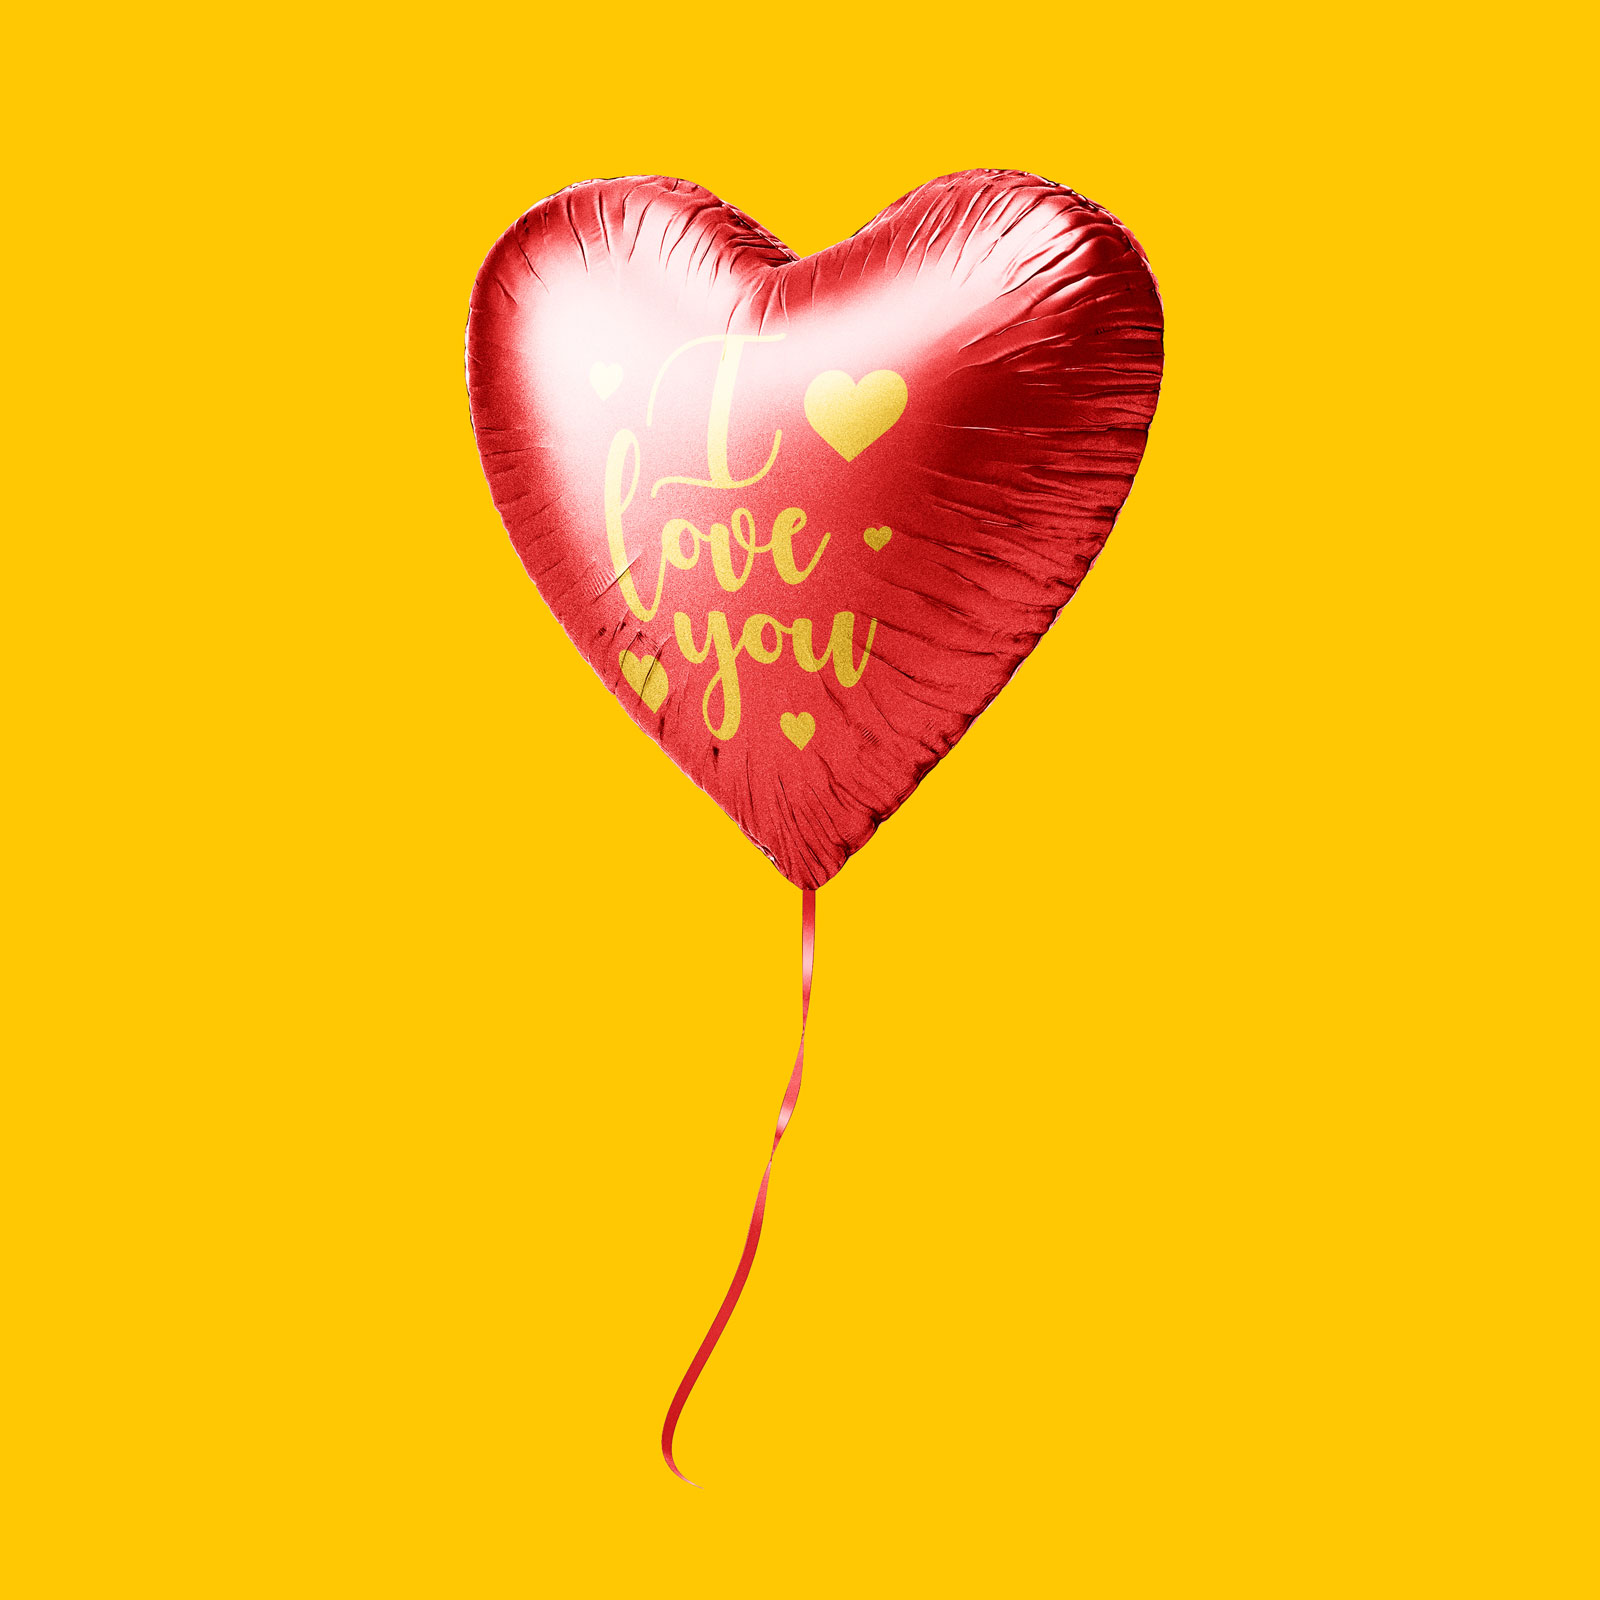 Heart Balloon Mockup Set For Valentine?s Day 2020